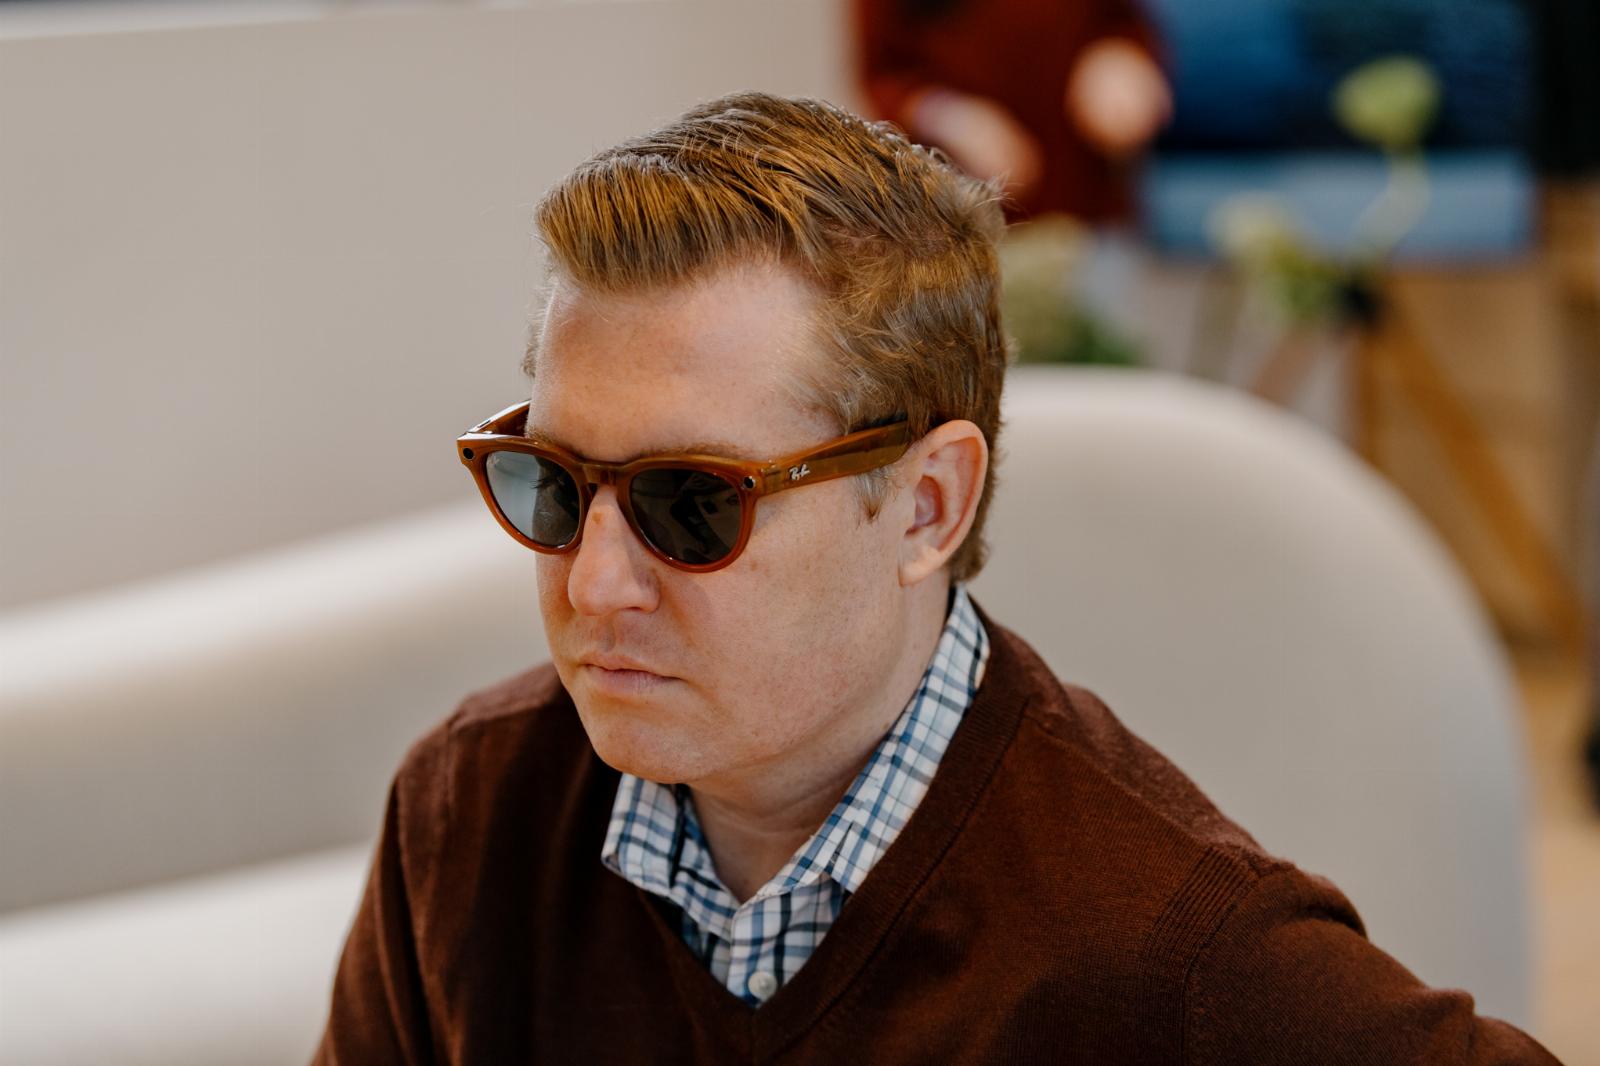 Ray-Ban Meta smart glasses livestream to Instagram and Facebook